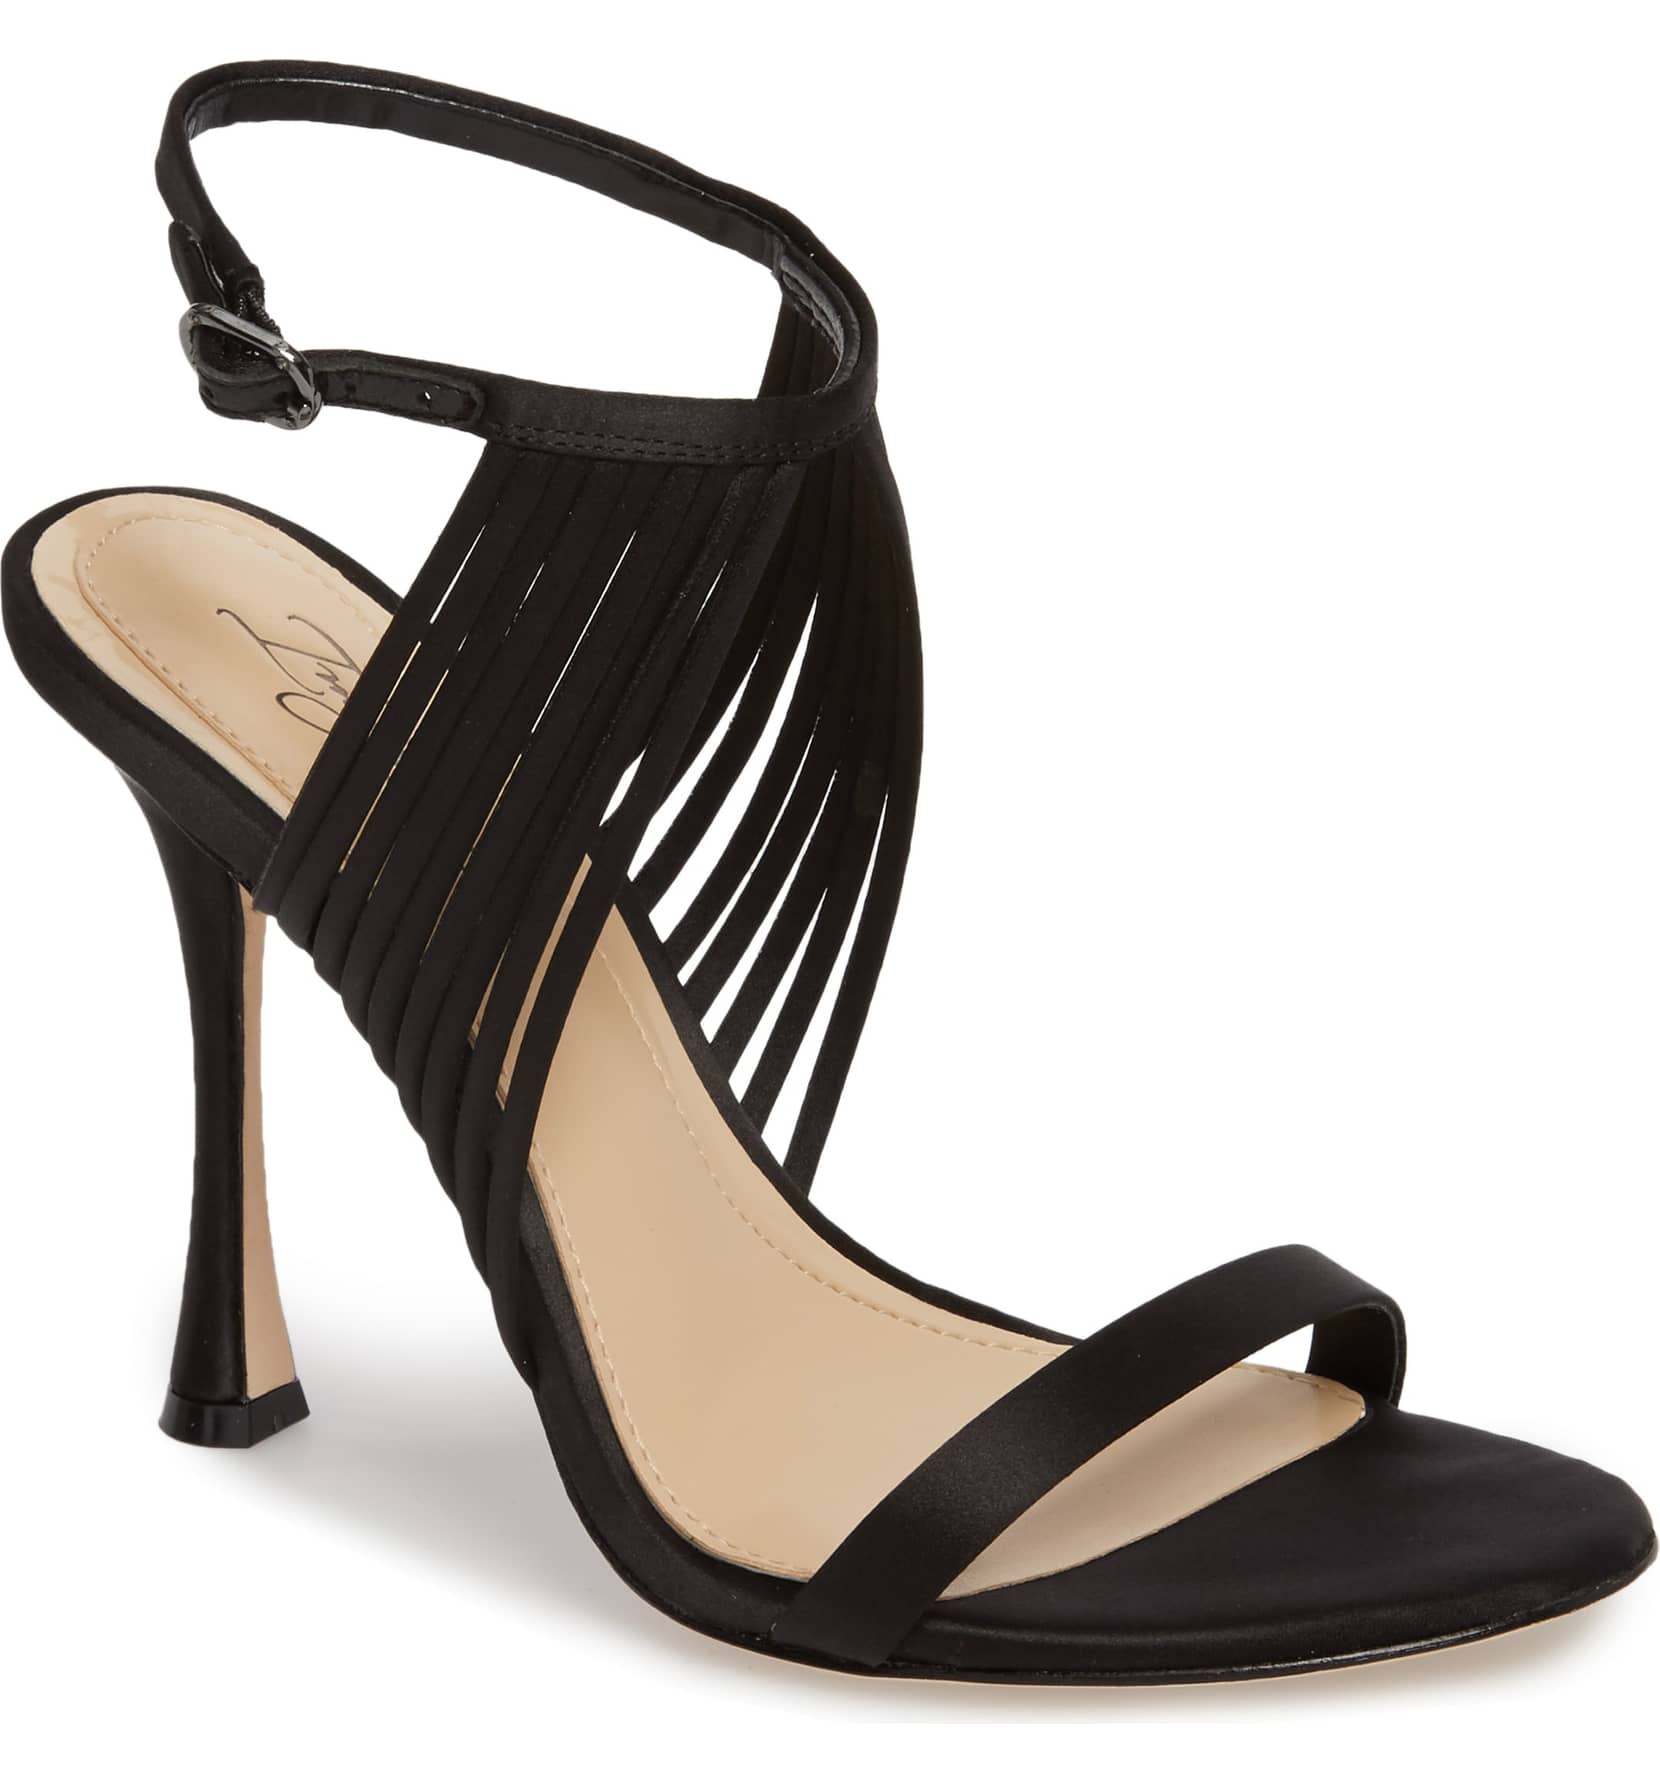 Vince Camuto Leather Heeled Strappy Sandals - Razanya - QVC.com